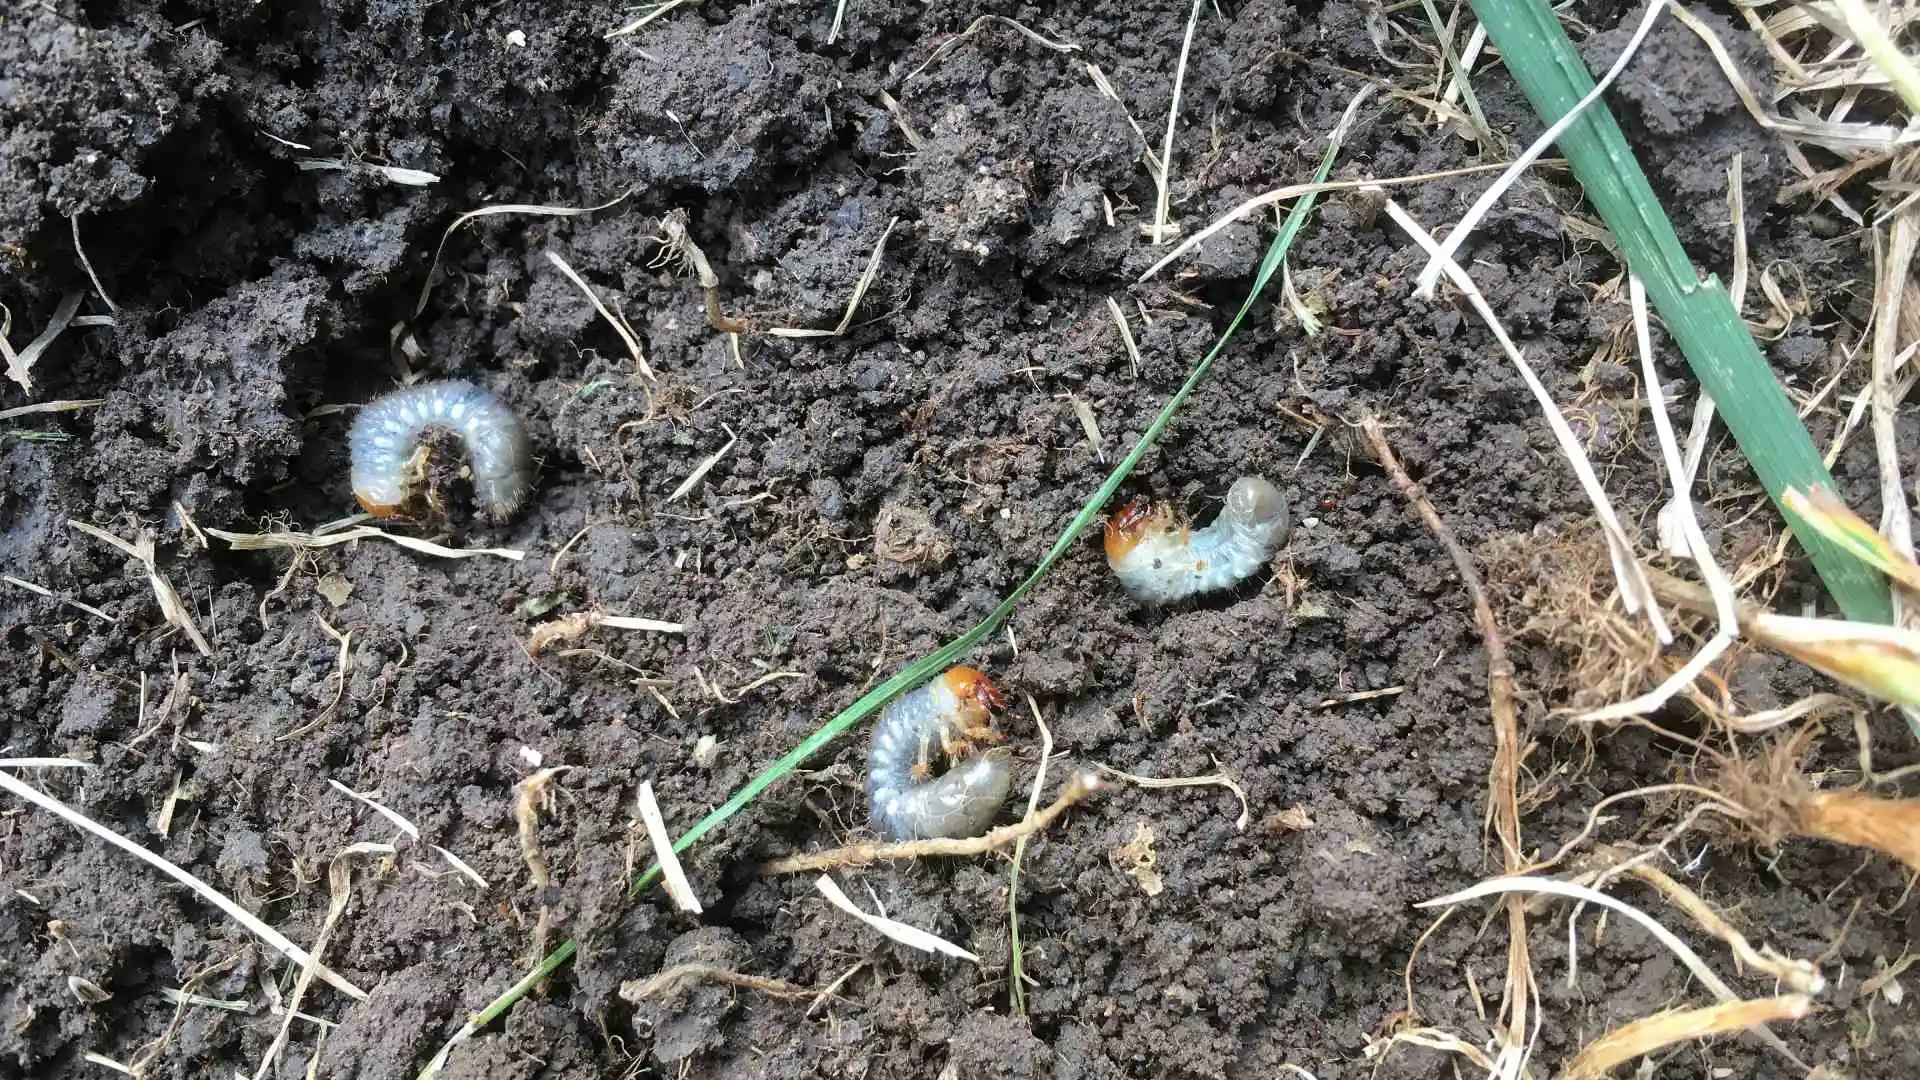 Grubs found in infested soil in Austin, TX.